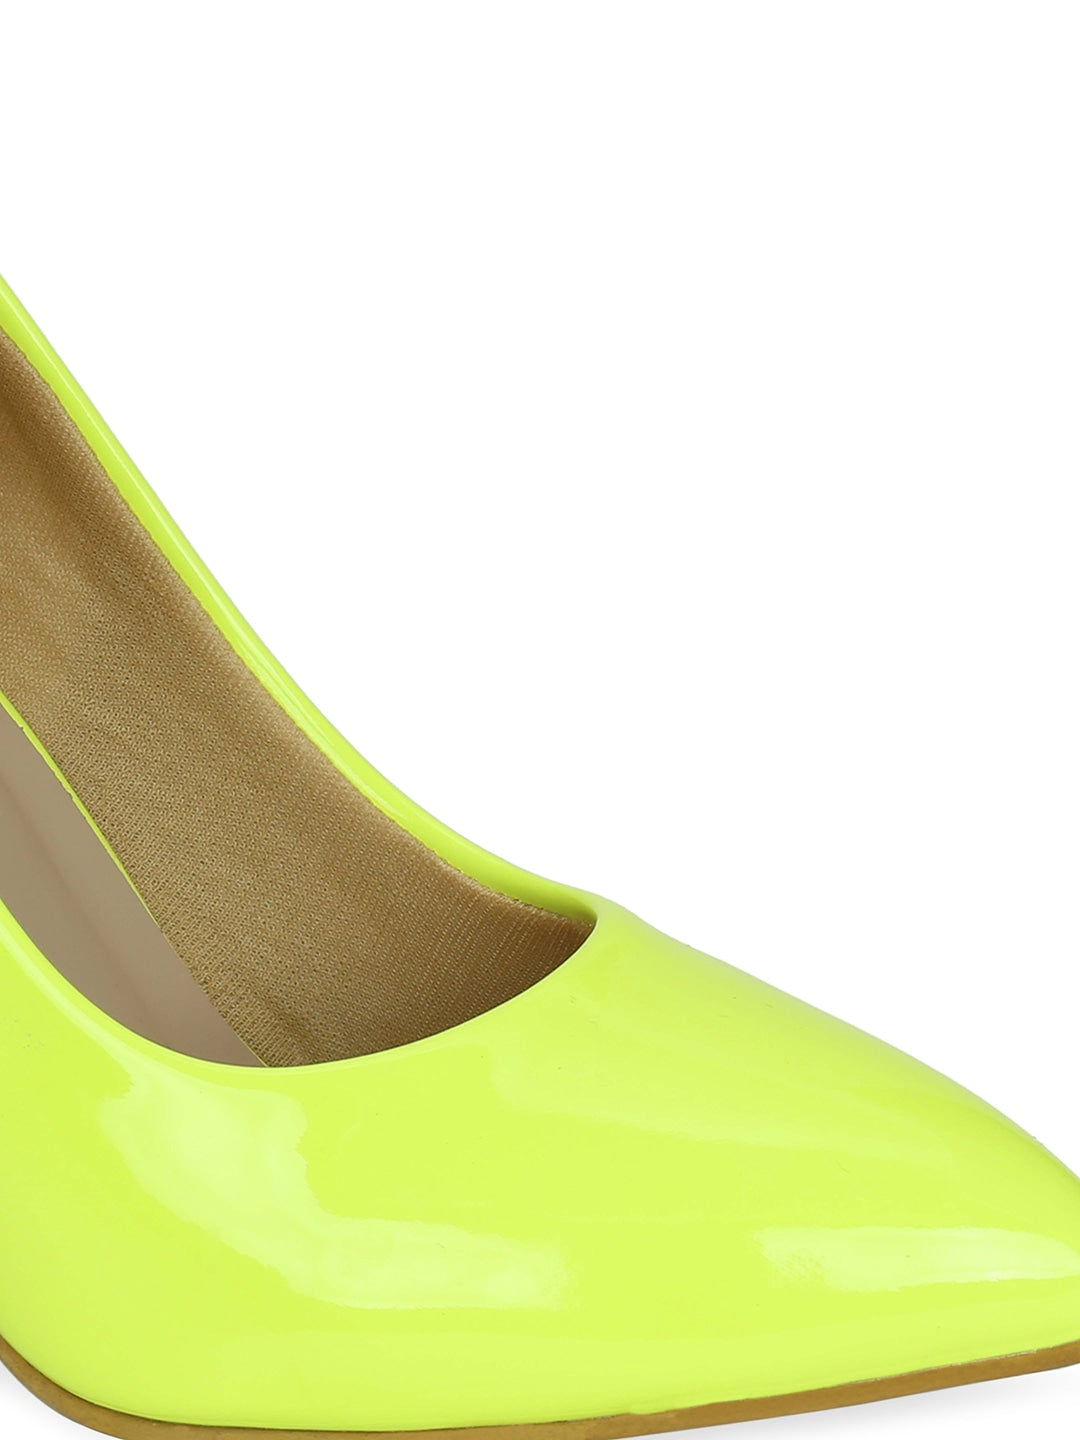 Get Glamr - Pumps - Image Swatches with Price - Green - c5a562b3-9f06-40a1-bbfc-f1d7e00c931d1648199444432GetGlamrFluorescentGreenStilettoPumps6_43850dcd-fe69-40ae-bc0c-a480330b95c6